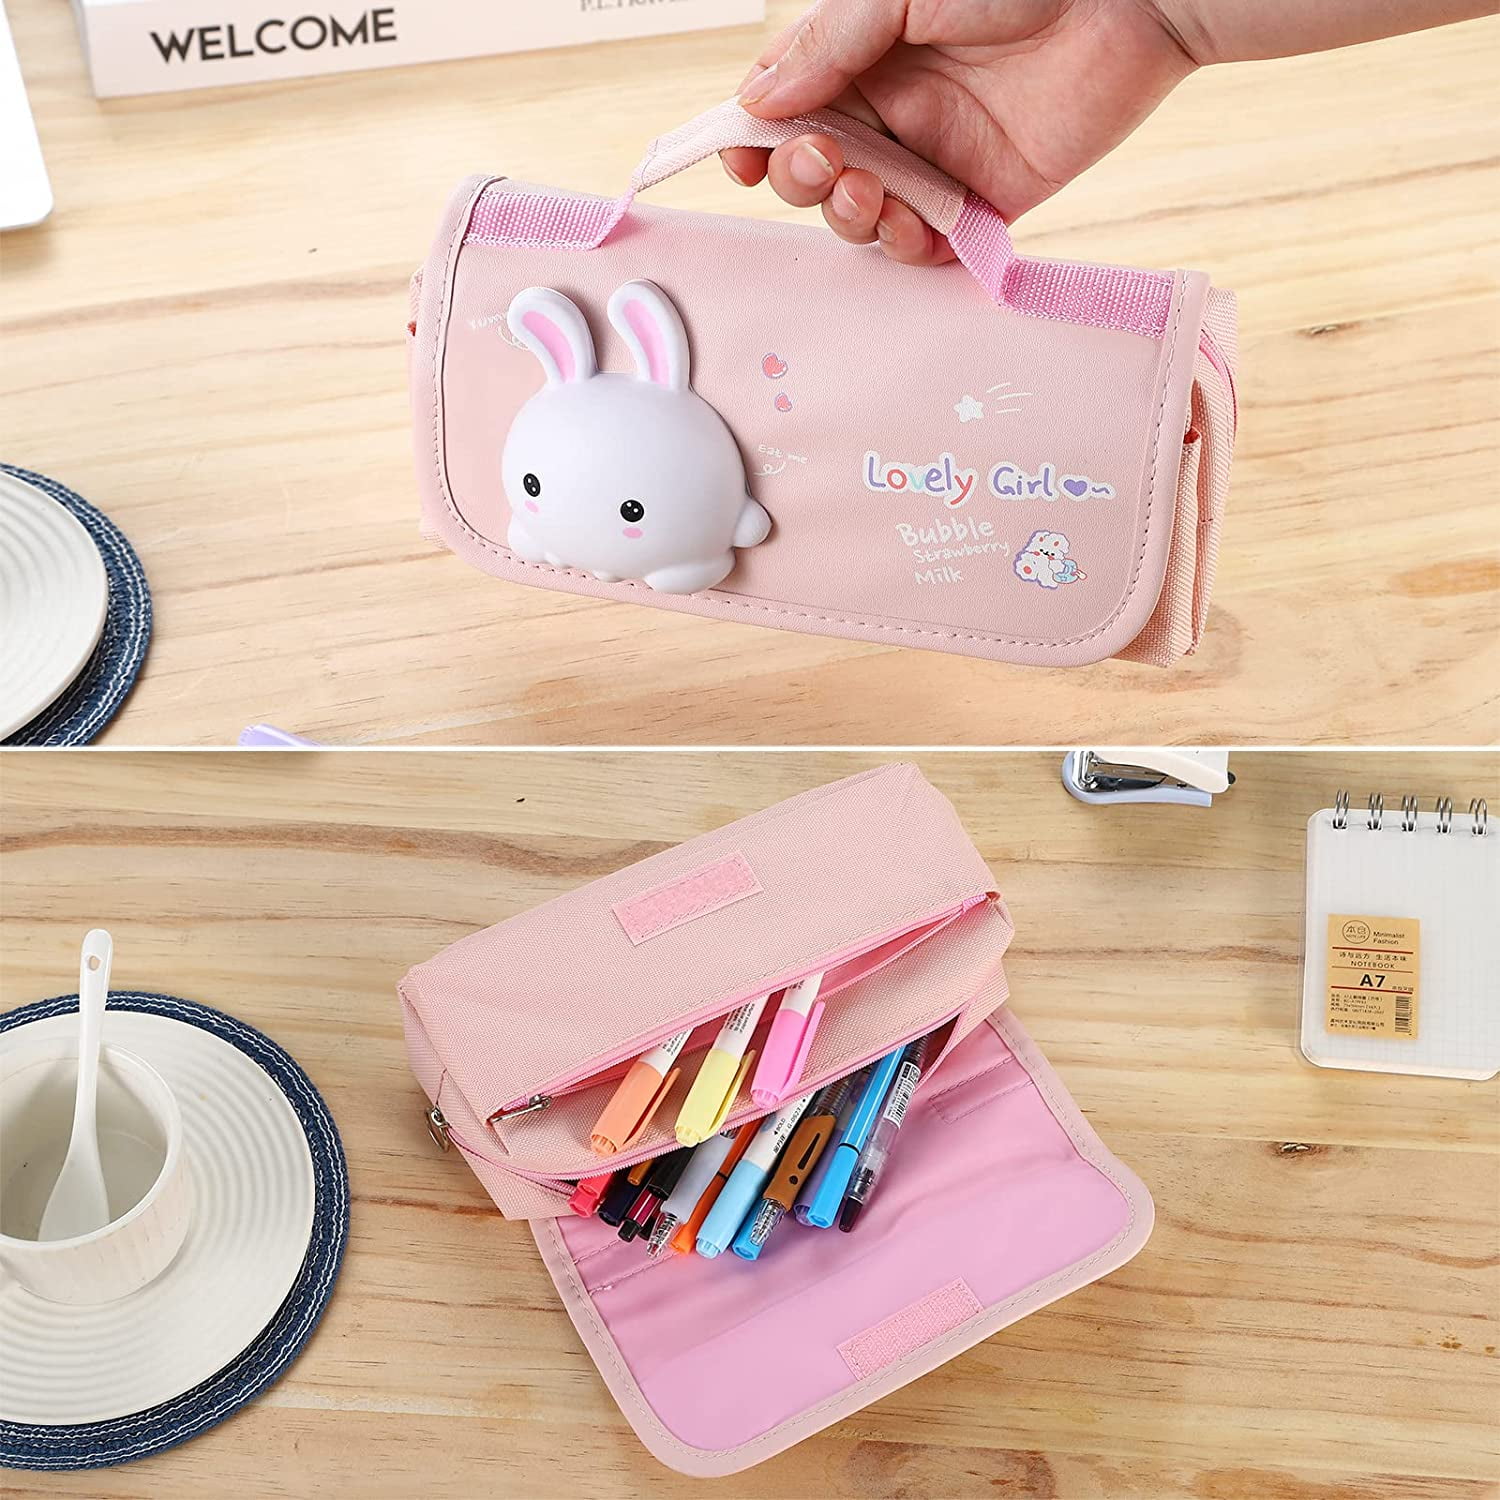 Kawaii Proud To Be A Nurse Pencil Cases for Girls Boys Large Capacity  Health Care Nursing Pencil Pouch School Supplies